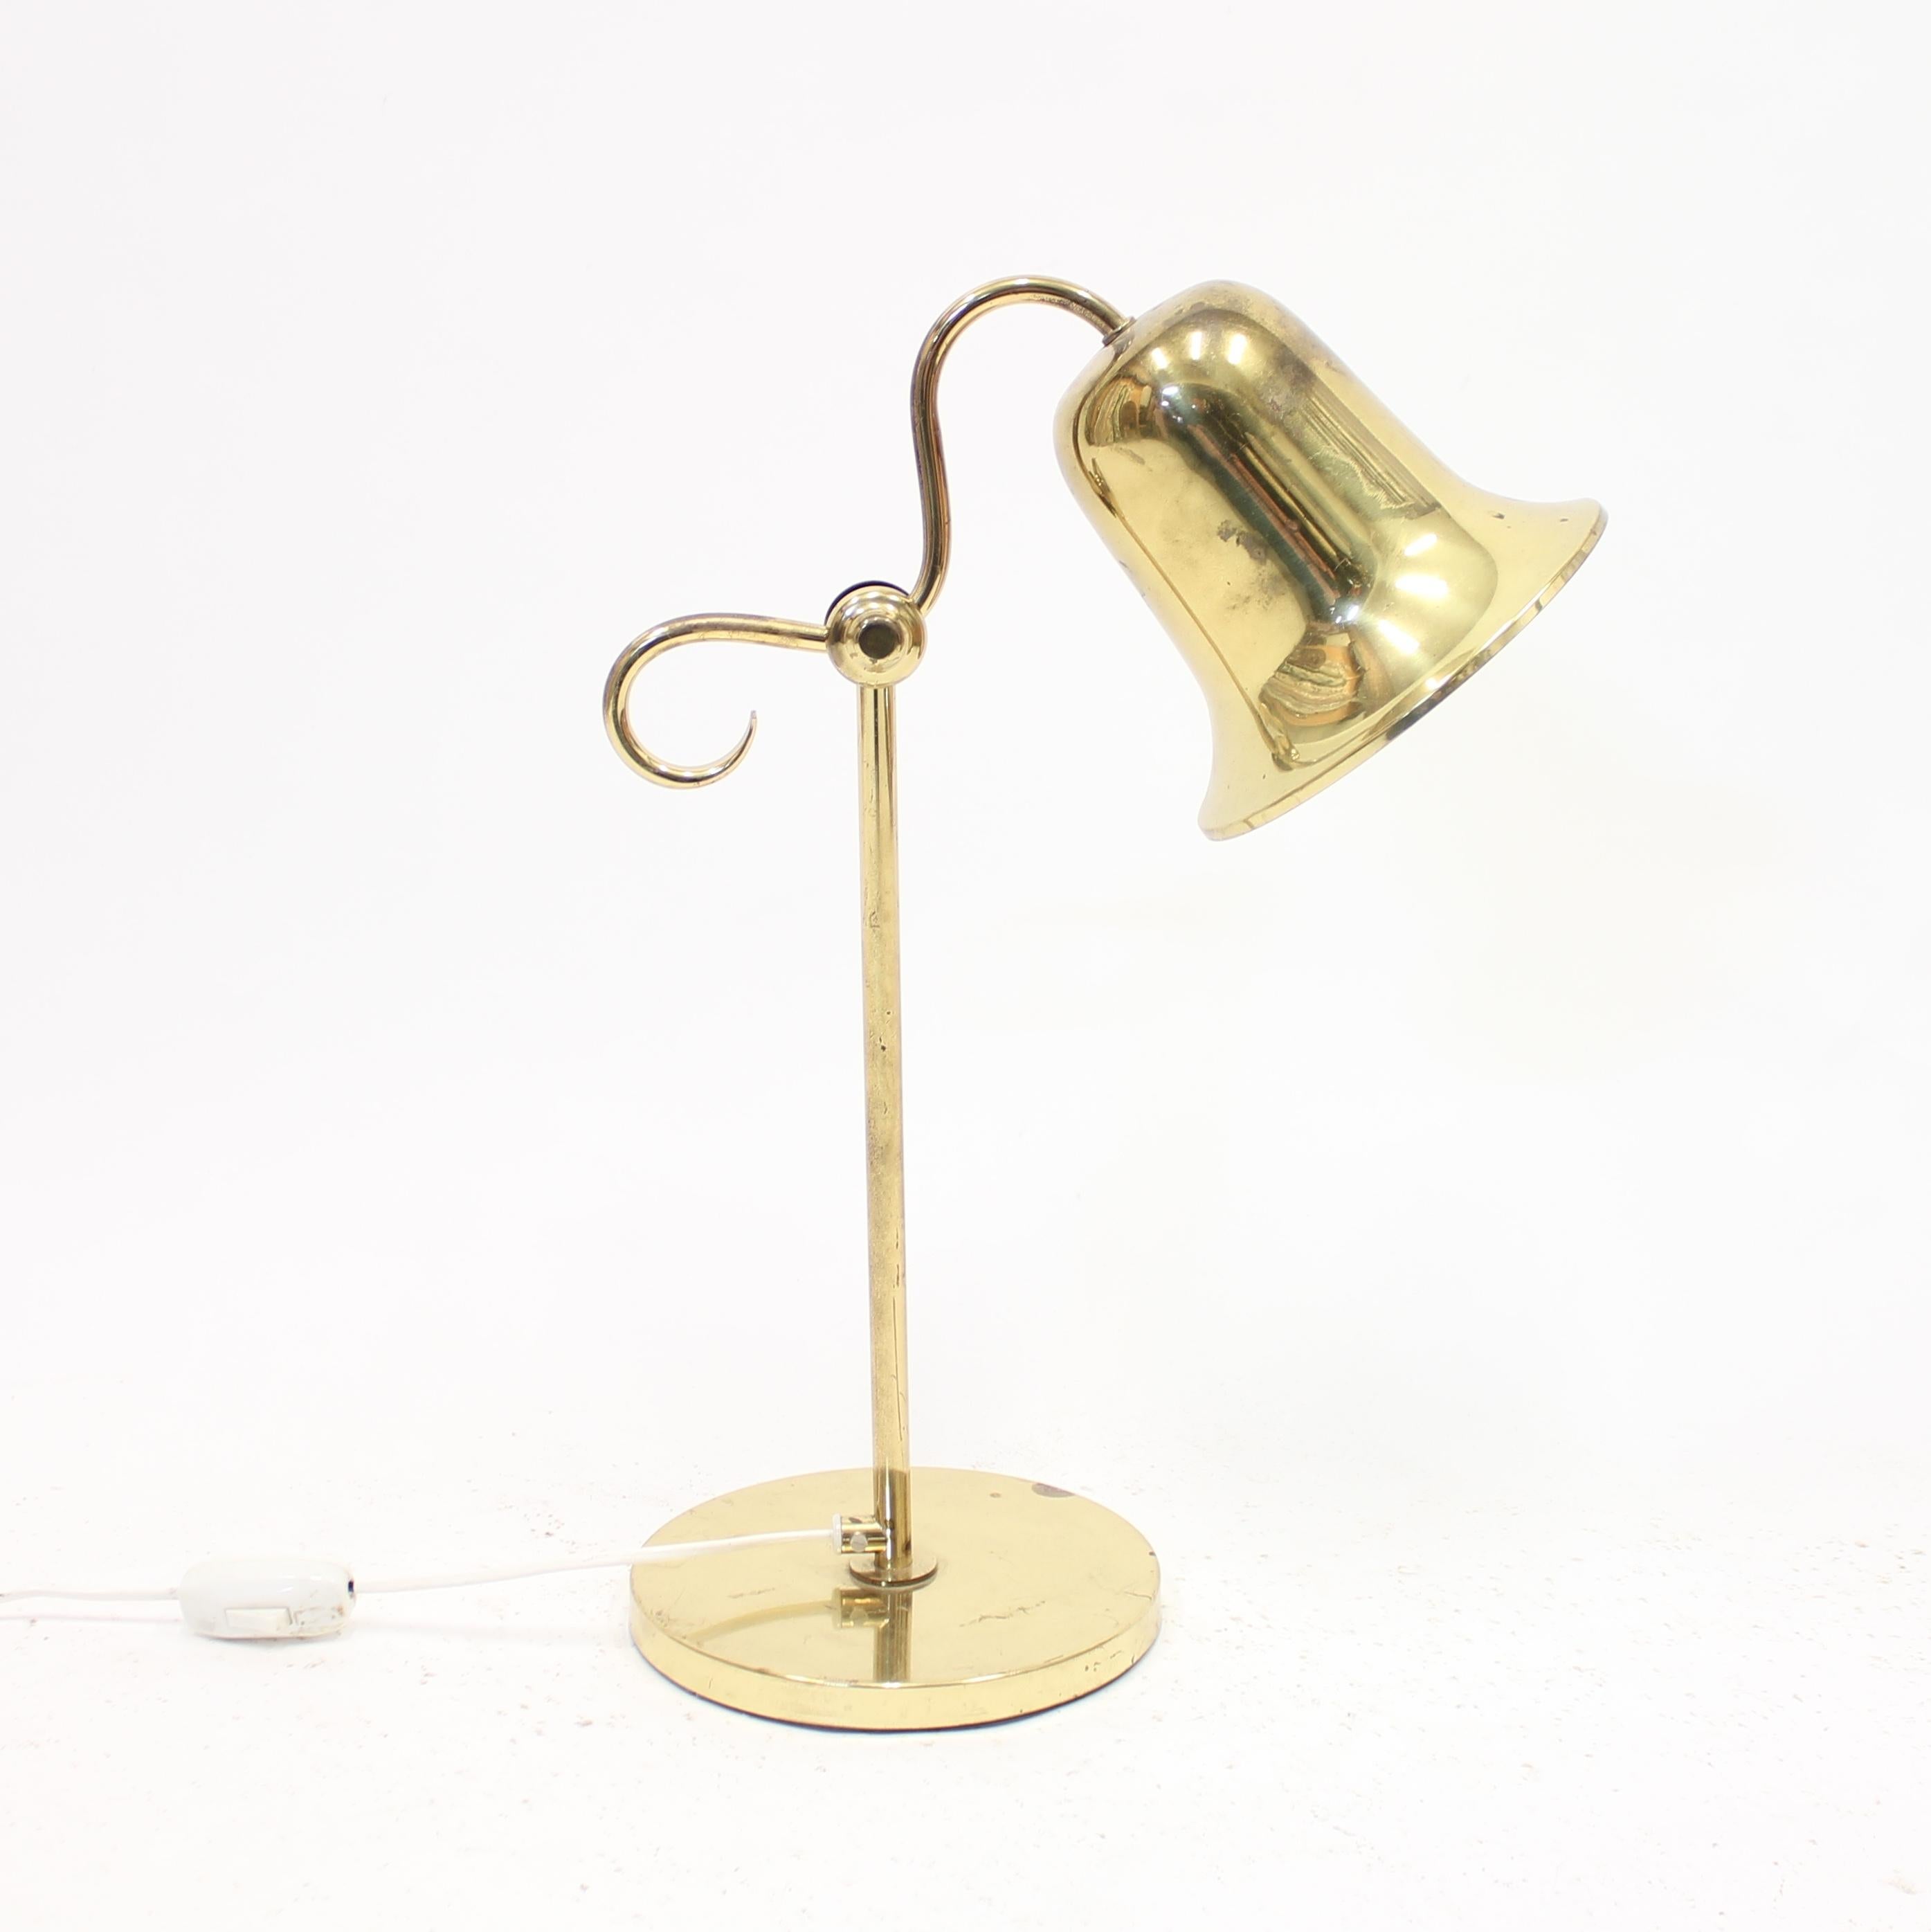 Swedish brass table lamp from the 1970s by Tyringe Konsthantverk with bell shaped shade, mounted on a stem with a round base.The underside marked with sticker from manufacturer and serial number. Overall good vintage condition with normal light